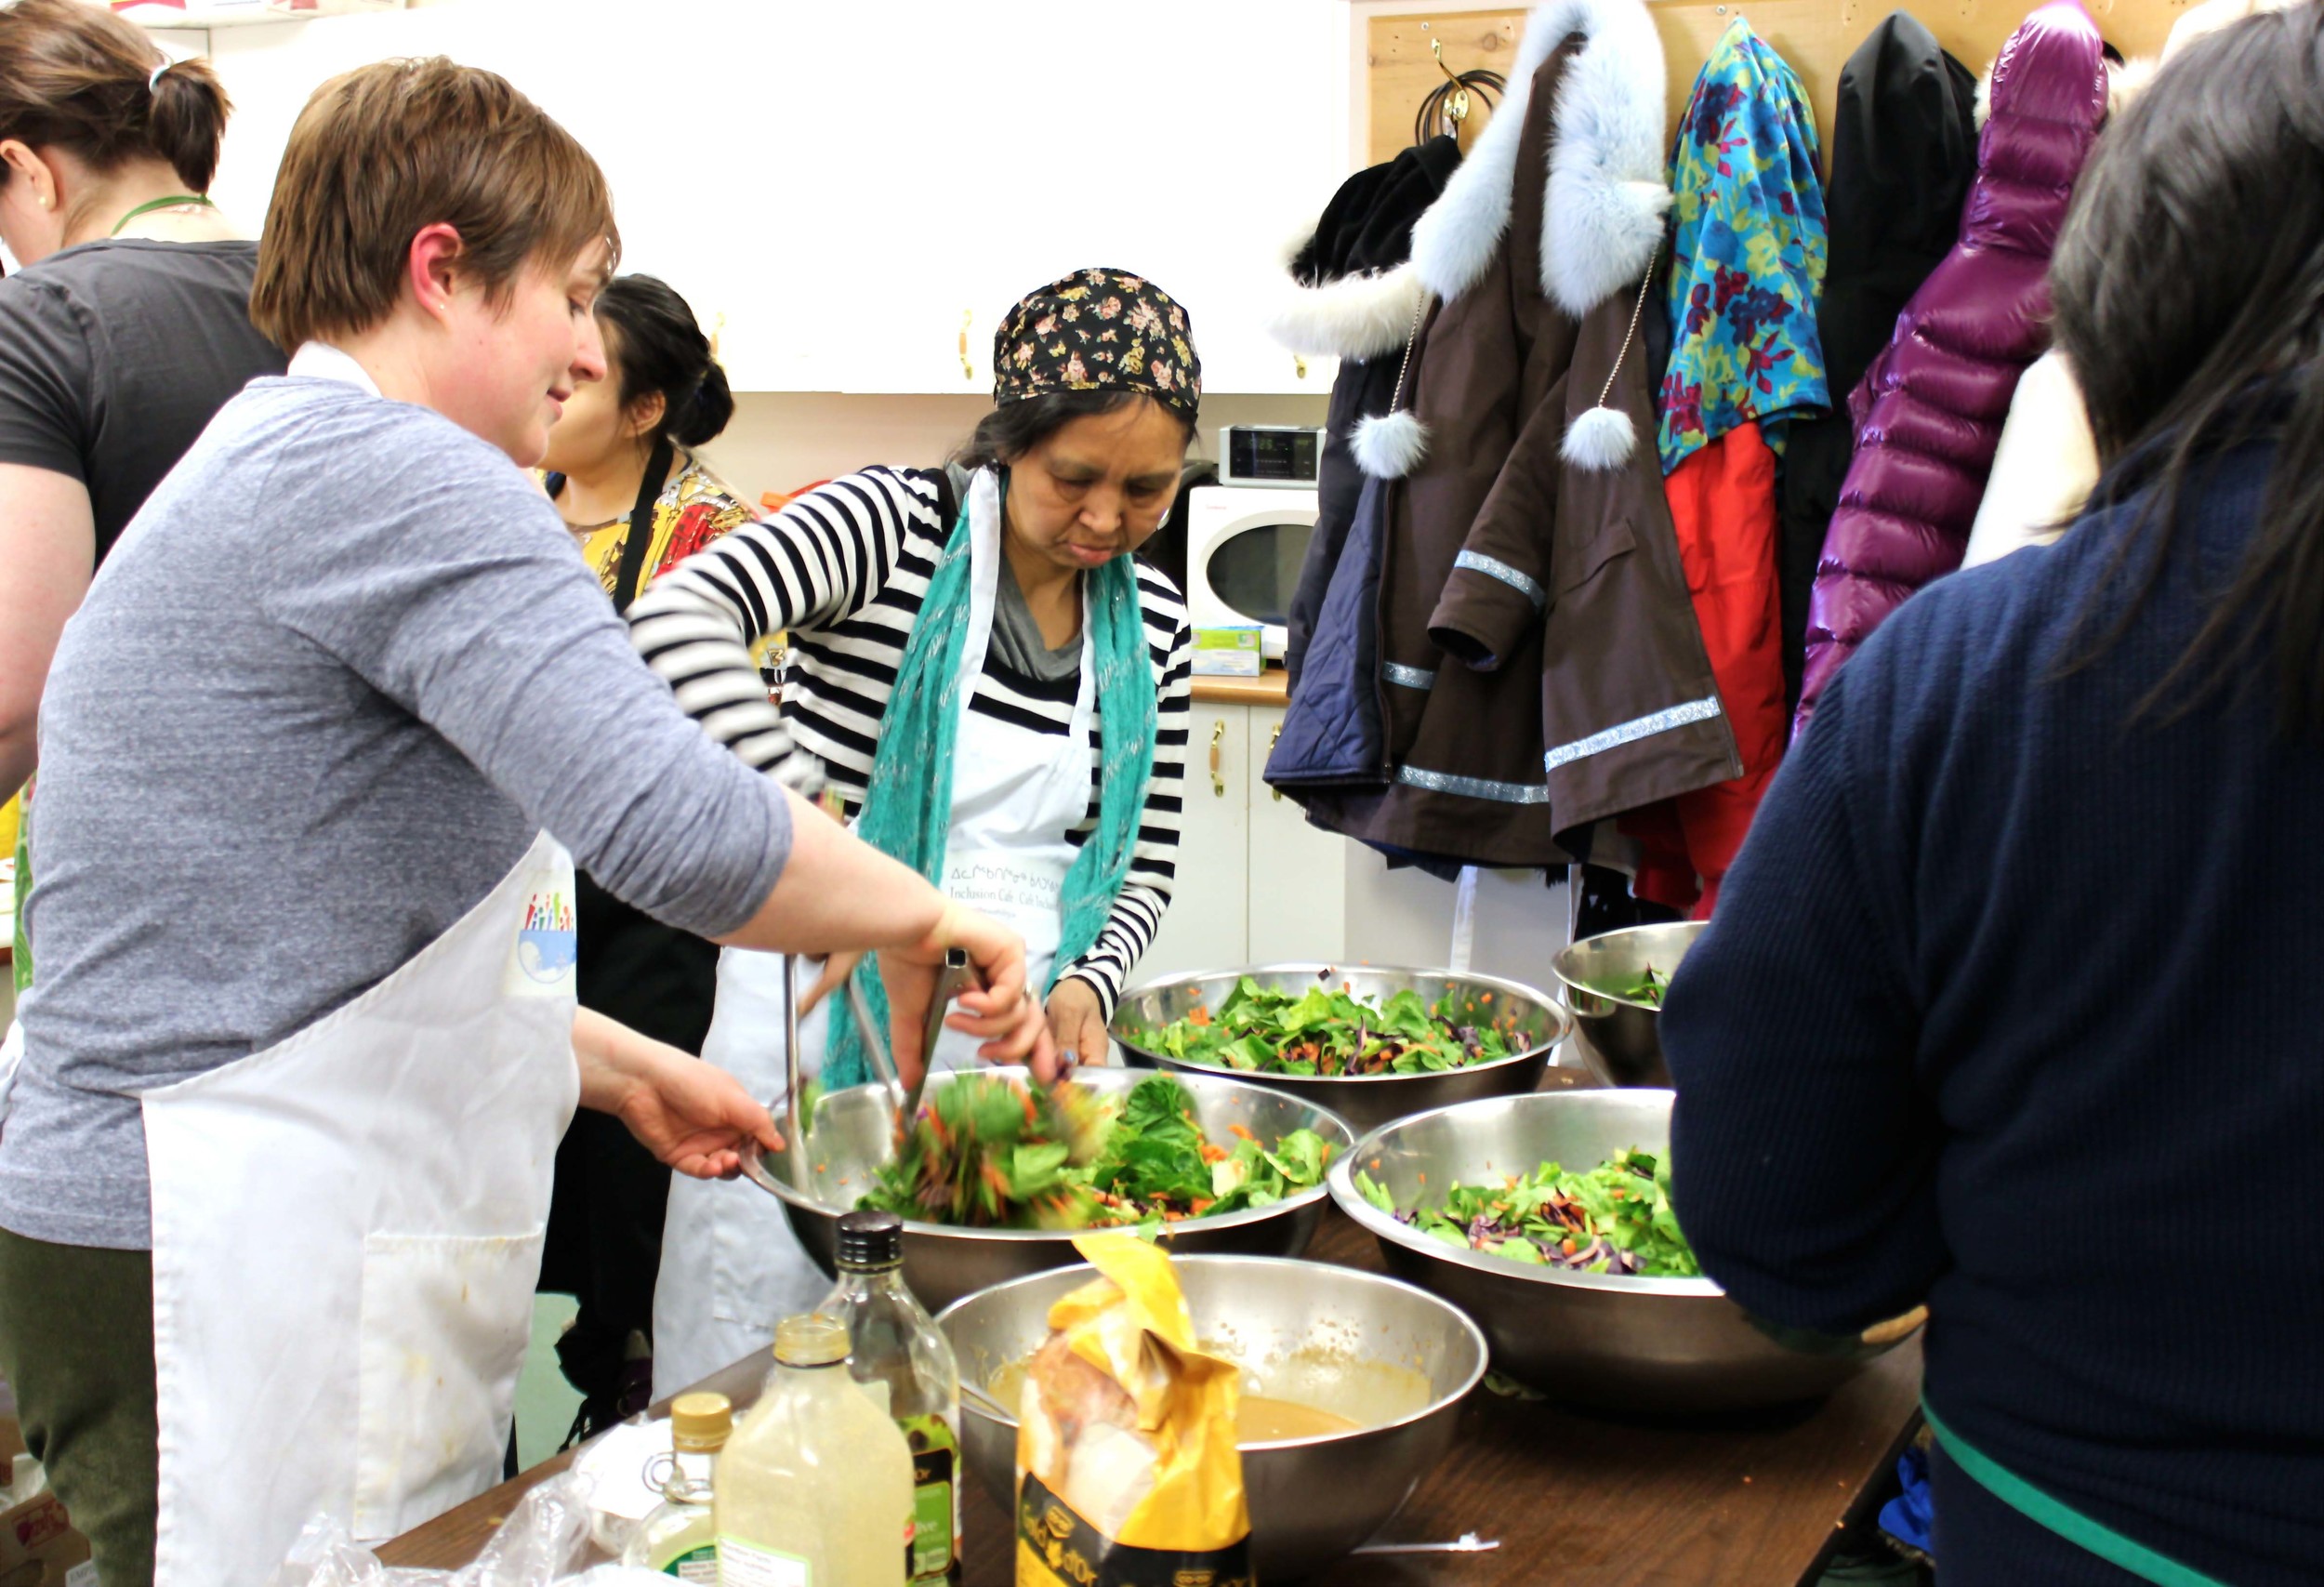 Inclusion Café's volunteers and staff busily prepare a healthy salad for dinner. Photo by Sarah Brandvold.